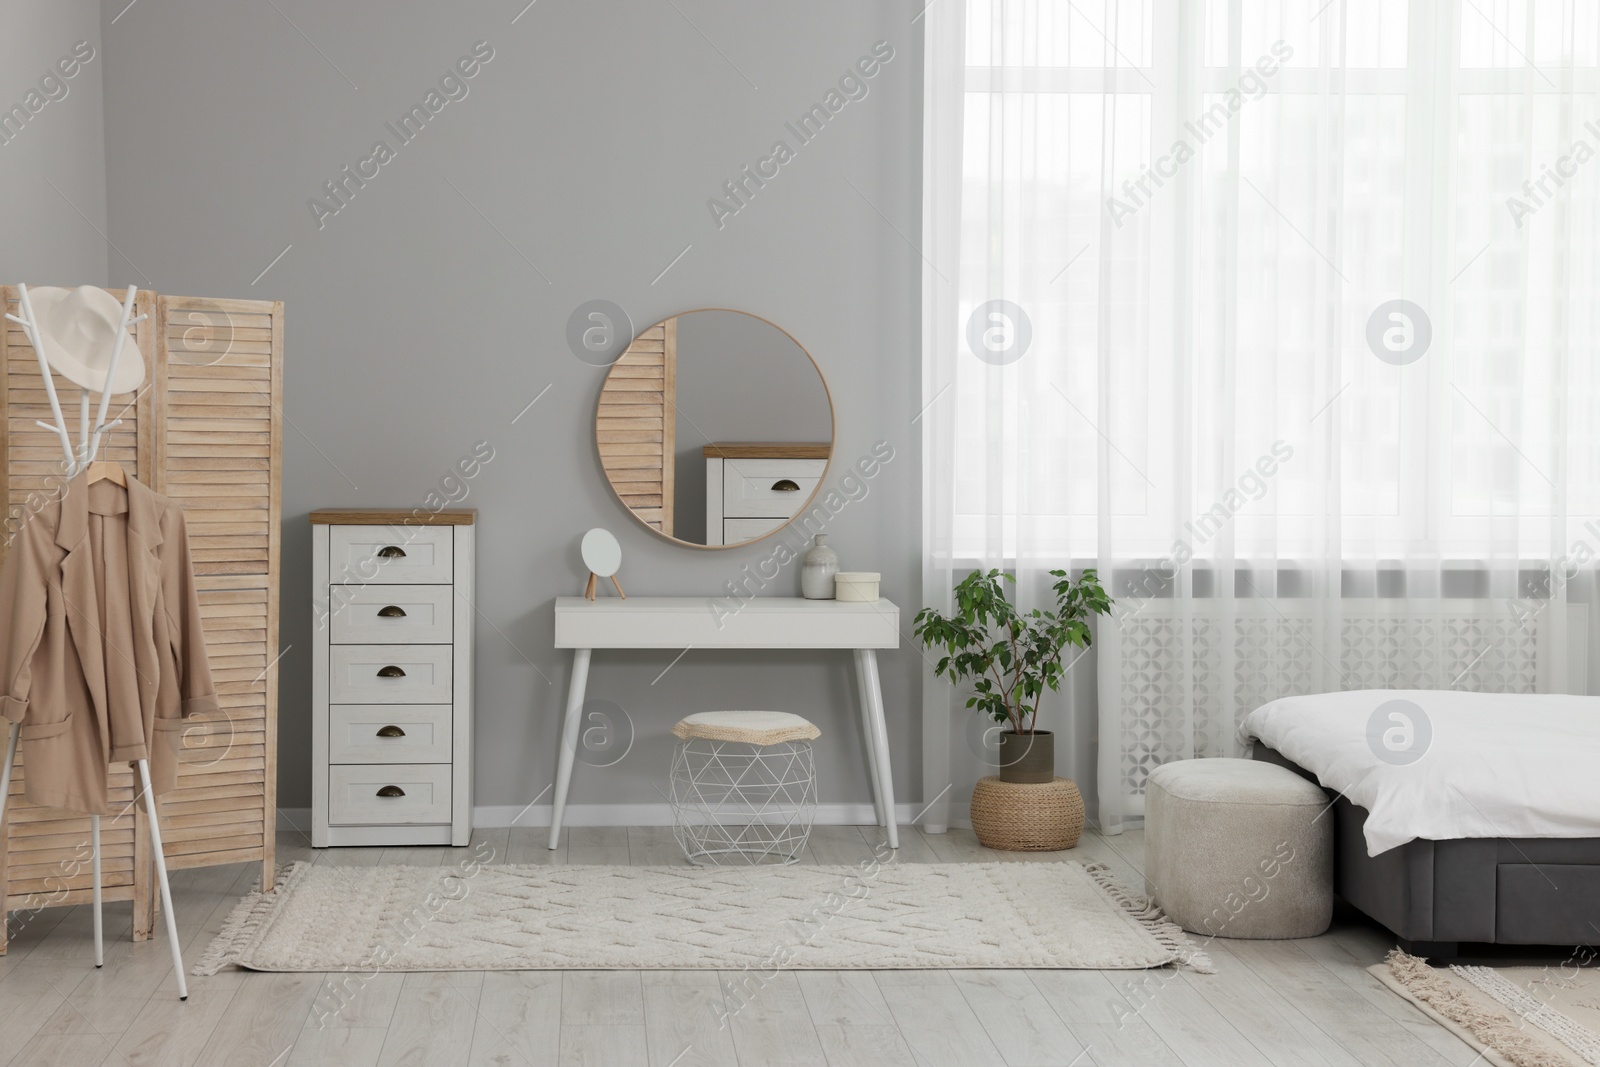 Photo of Stylish bedroom interior with bed, ottoman, dressing table and chest of drawers